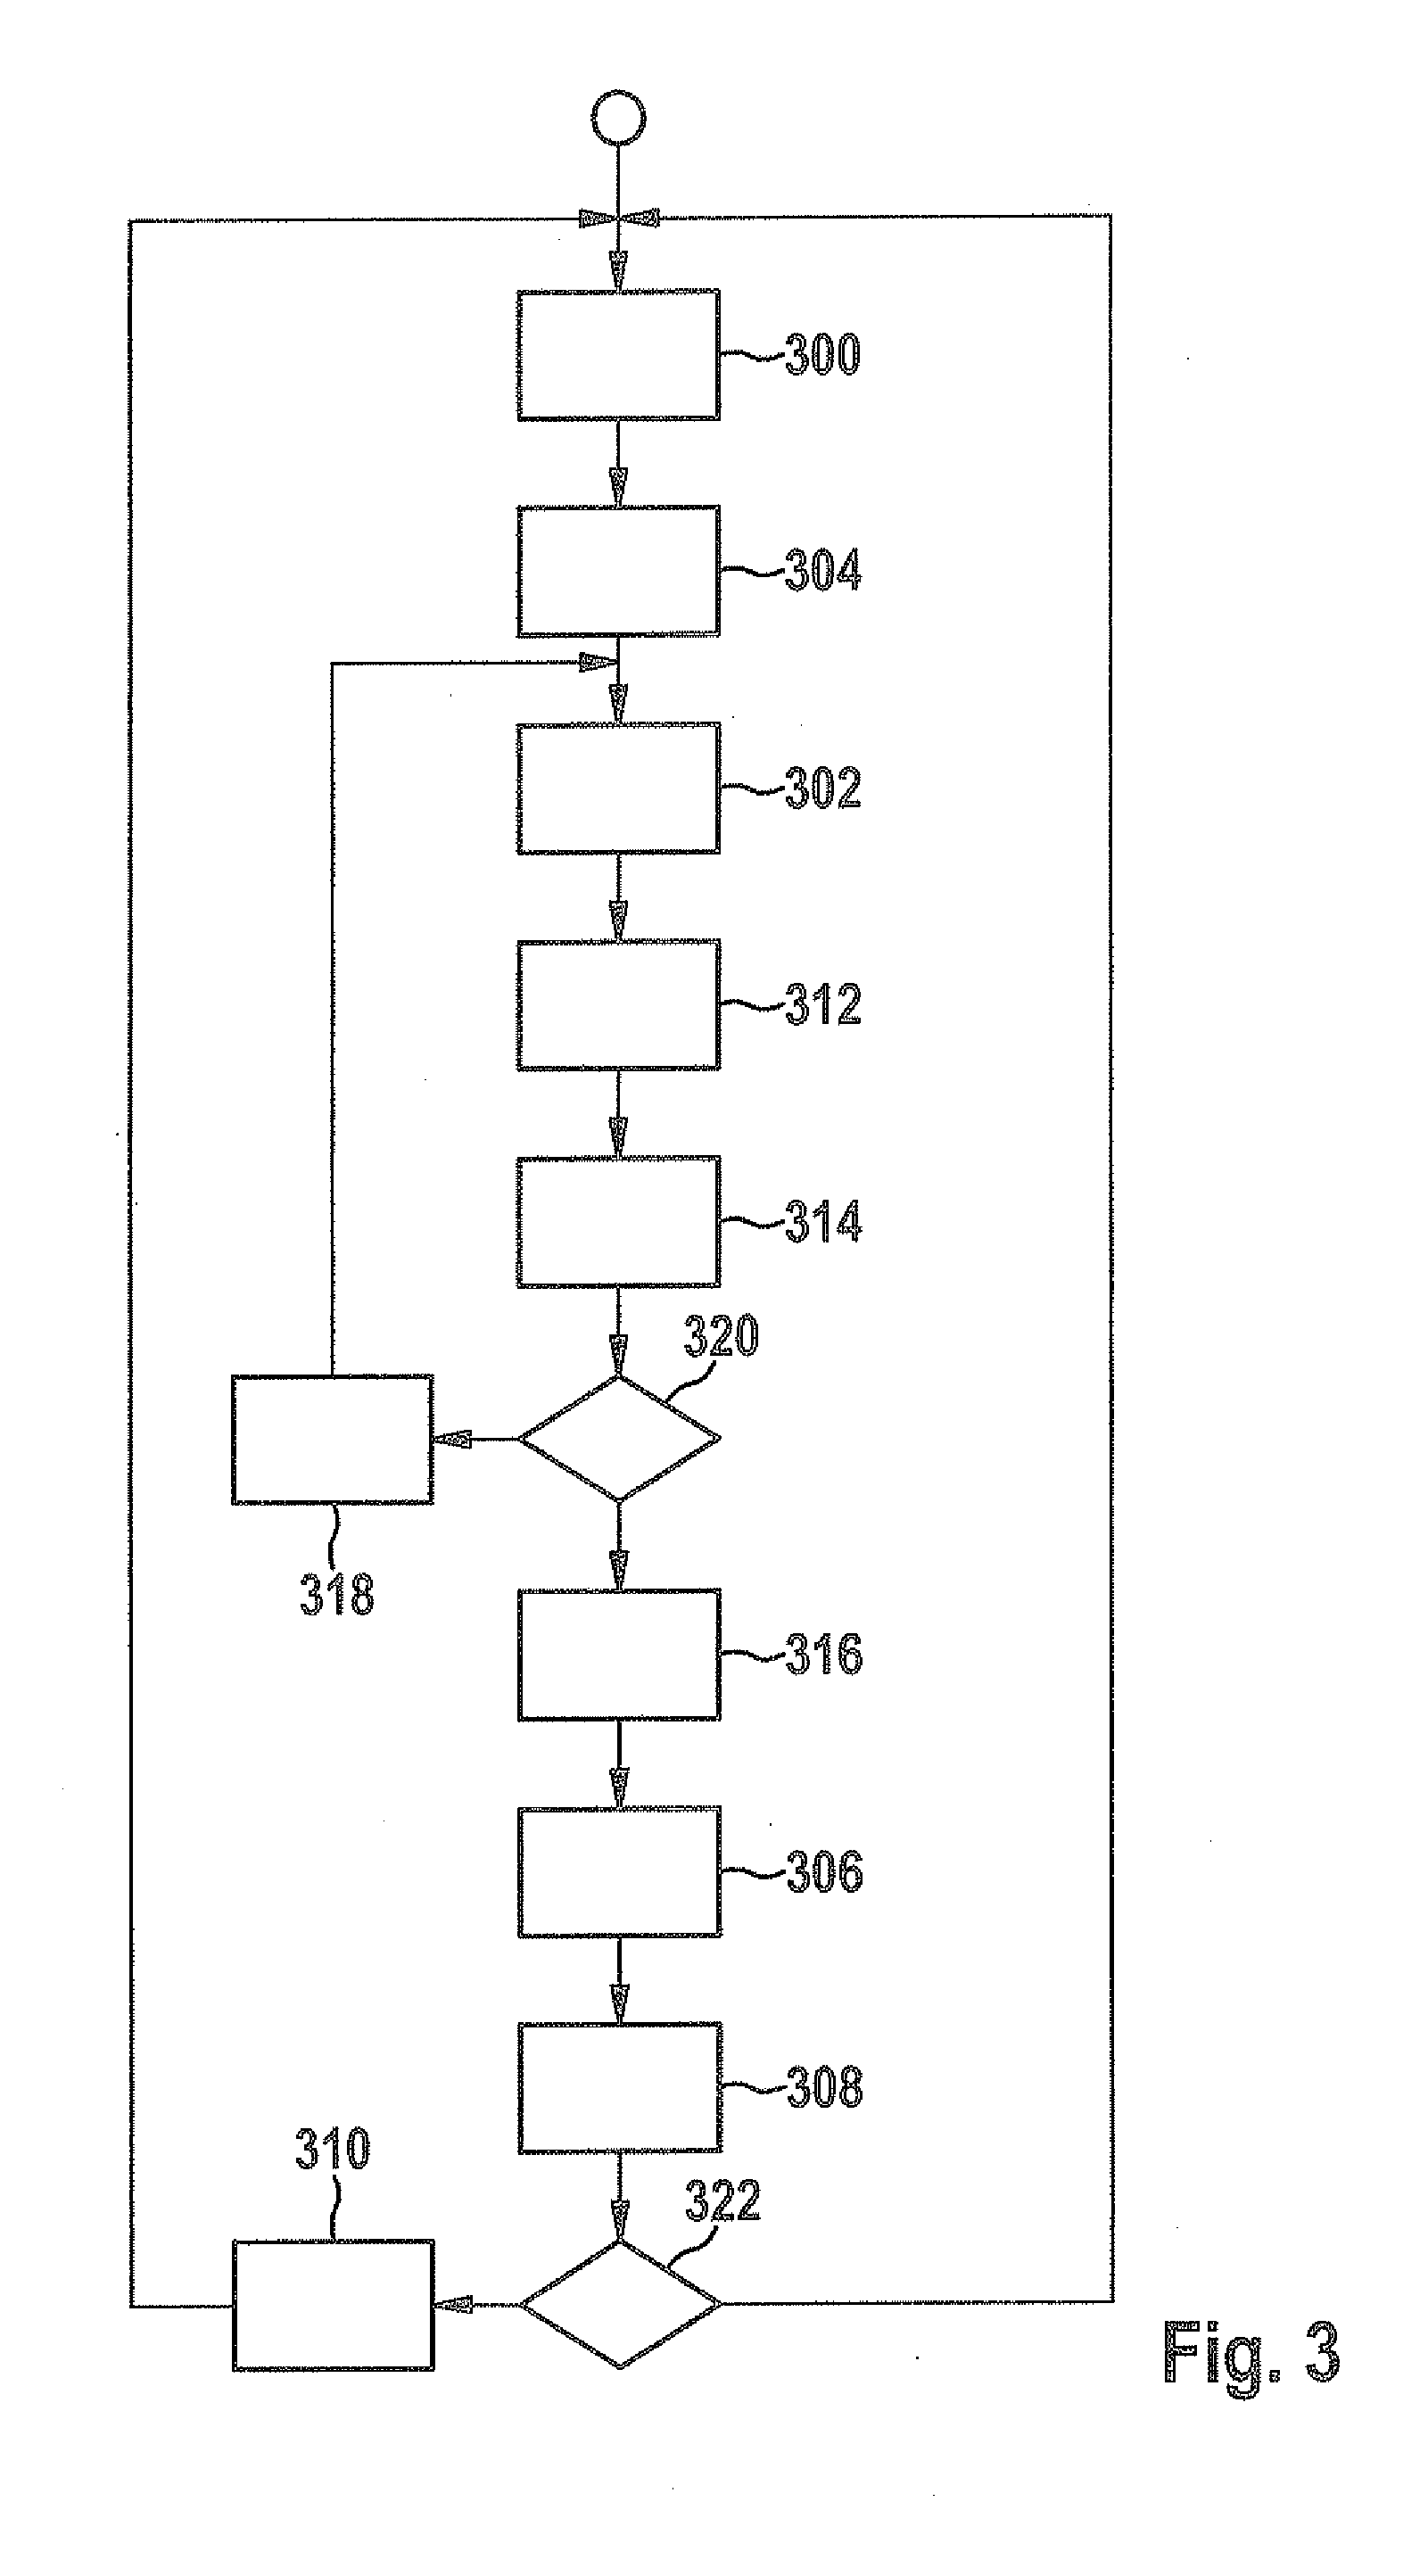 Method and Device for Monitoring a High-Pressure Fuel System